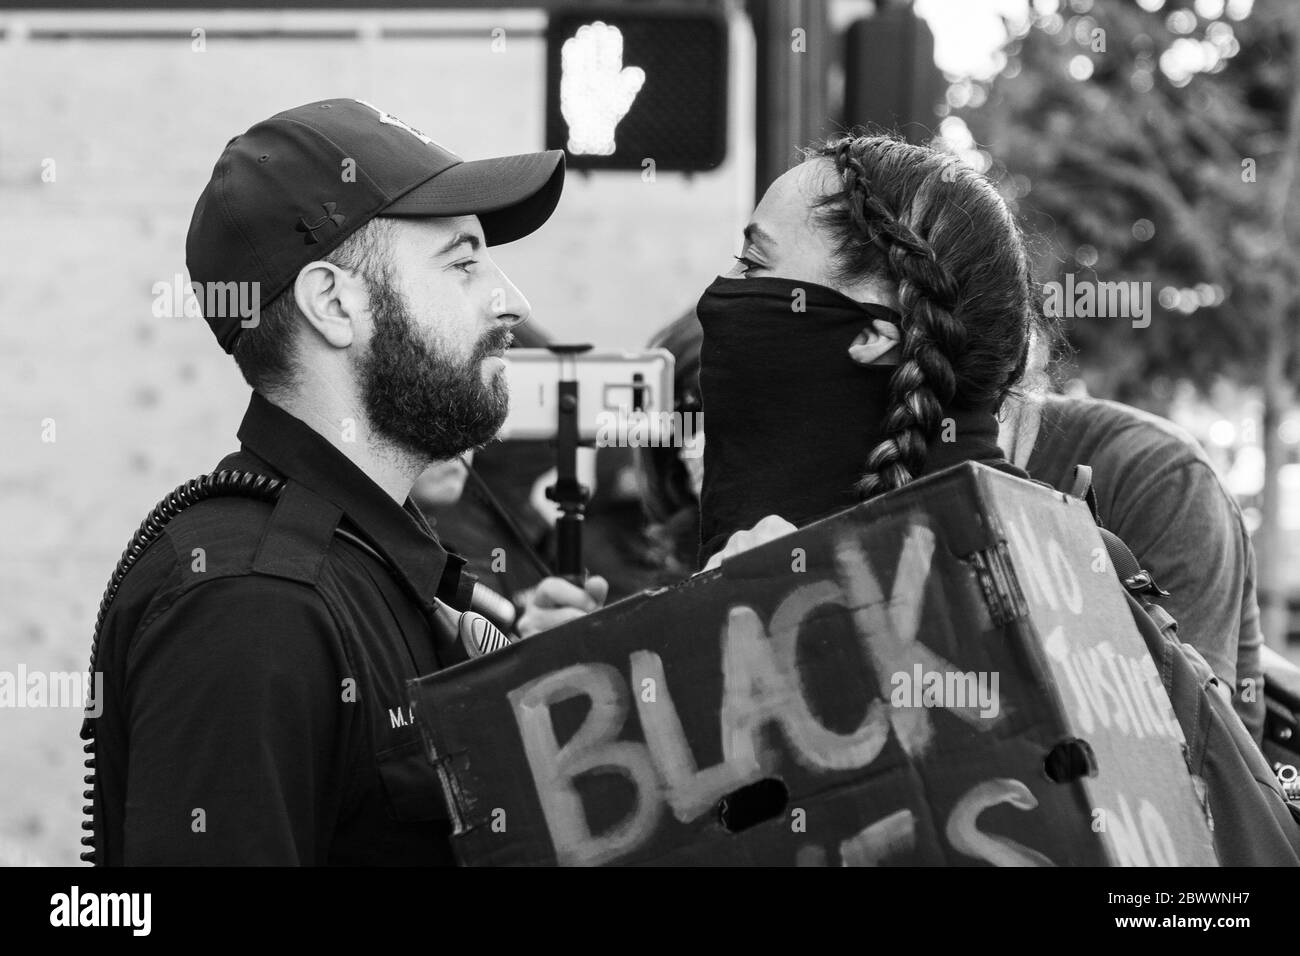 Oakland, Ca. 2nd June, 2020. An Oakland Police Officer and a protestor have a staredown near the Oakland Police Department in Oakland, California on June 2, 2020 after the death of George Floyd. Credit: Chris Tuite/Image Space/Media Punch/Alamy Live News Stock Photo